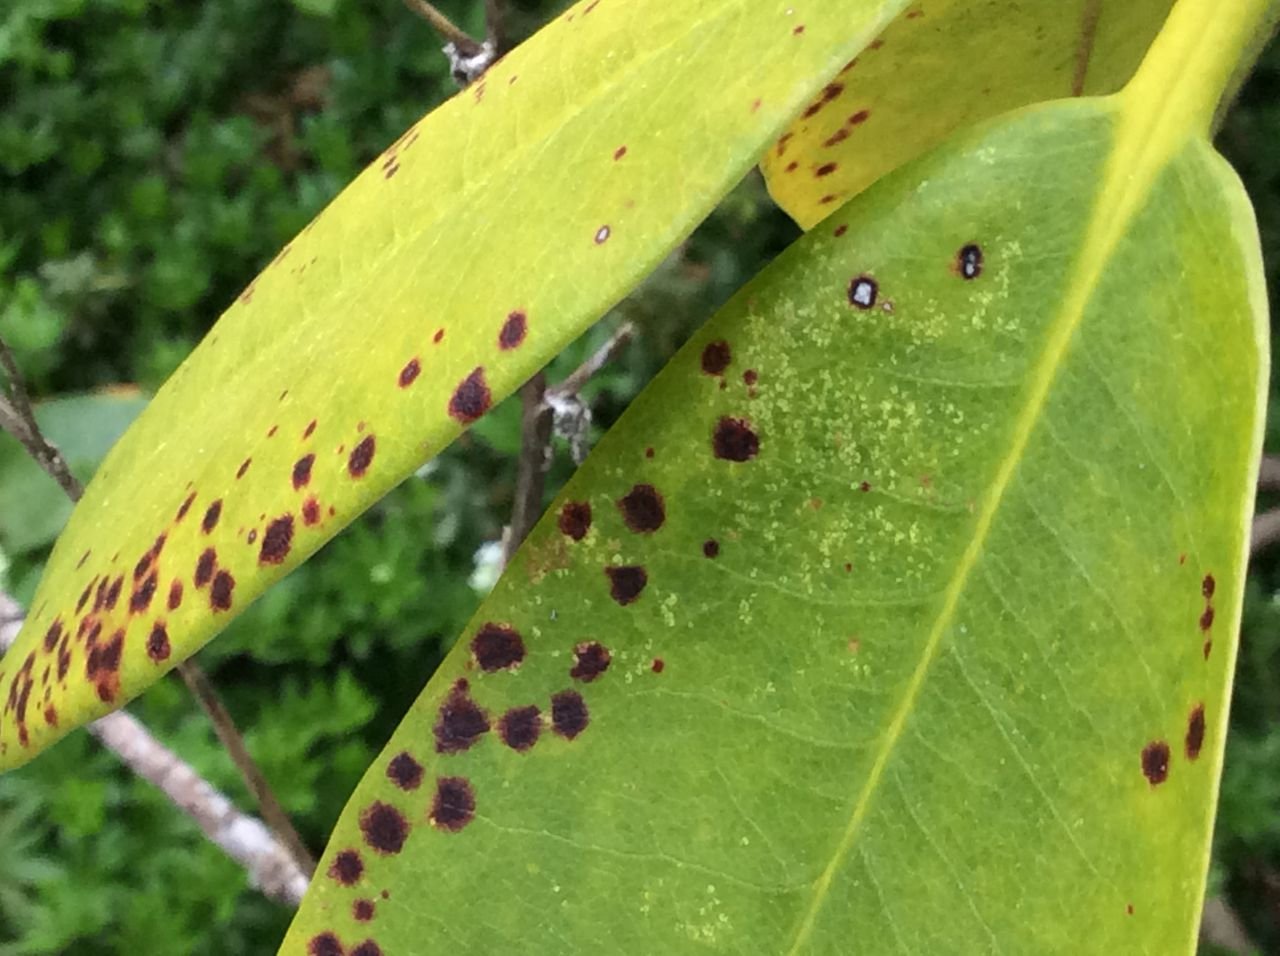 Bacterial leaf spotting on rhododendron